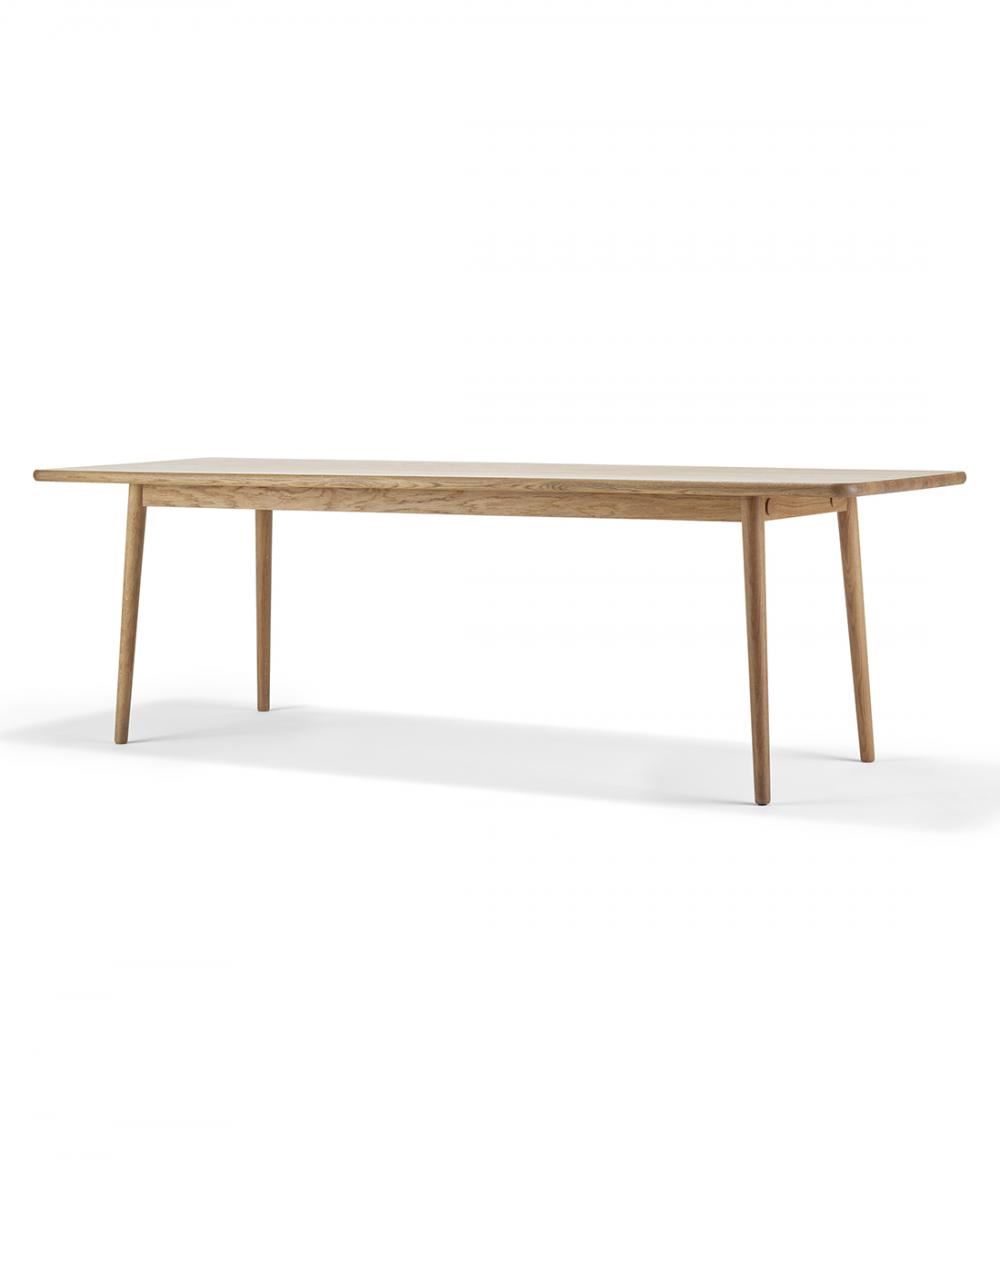 Stolab Miss Holly Table Rectangular Birch 235 X 82cm Light Wood Designer Furniture From Holloways Of Ludlow